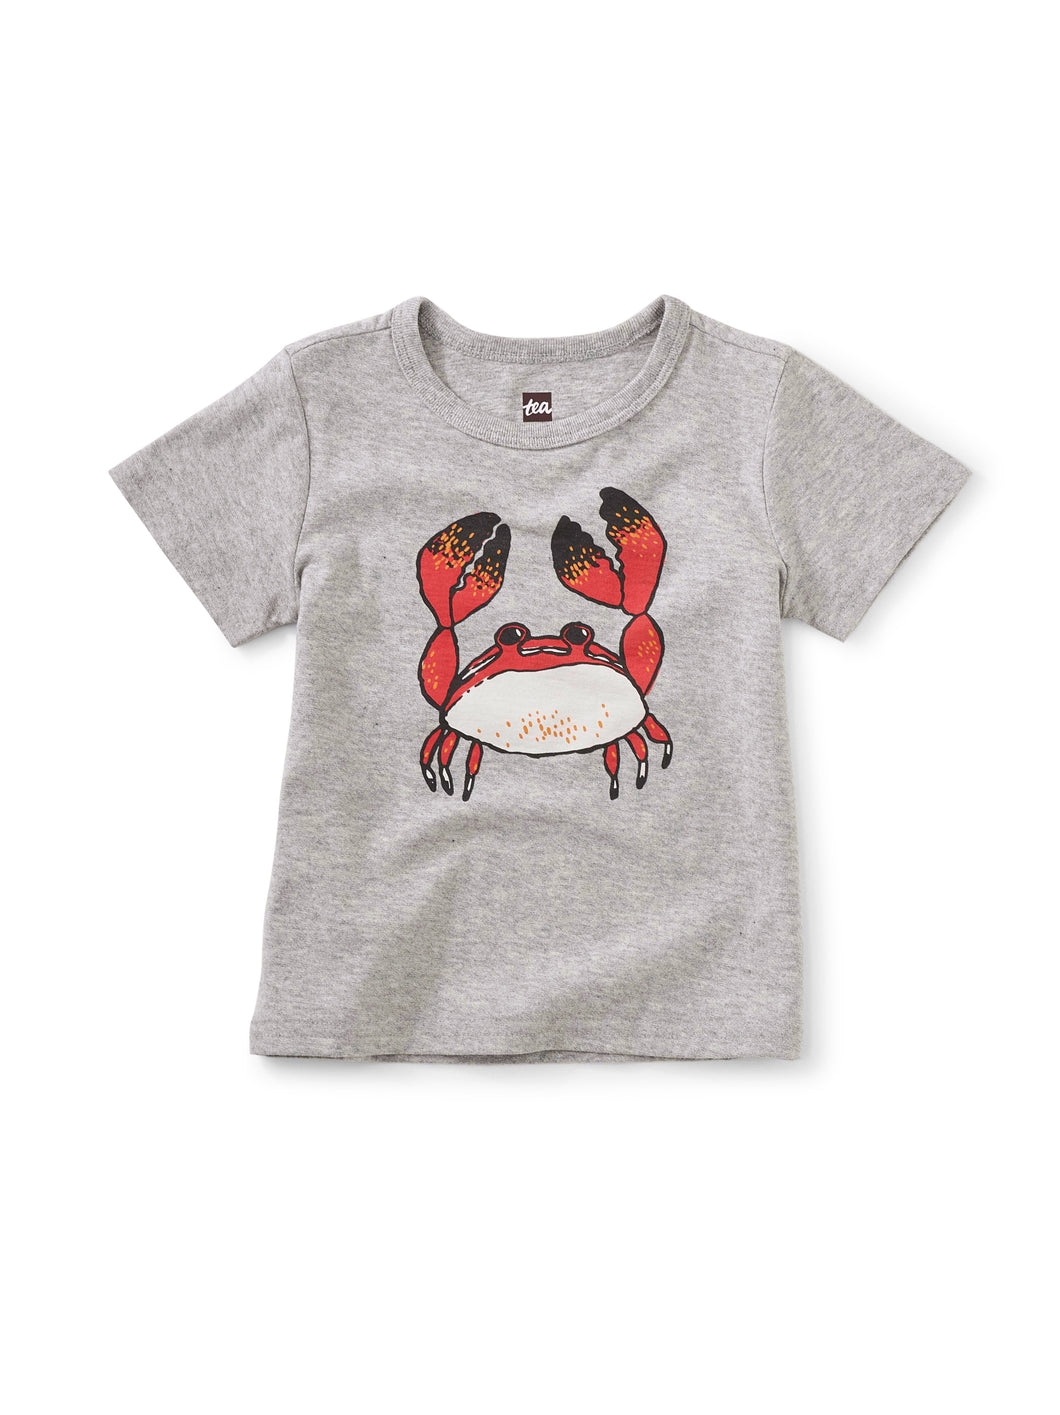 Feeling Crabby Baby Graphic Tee - Med Heather Grey